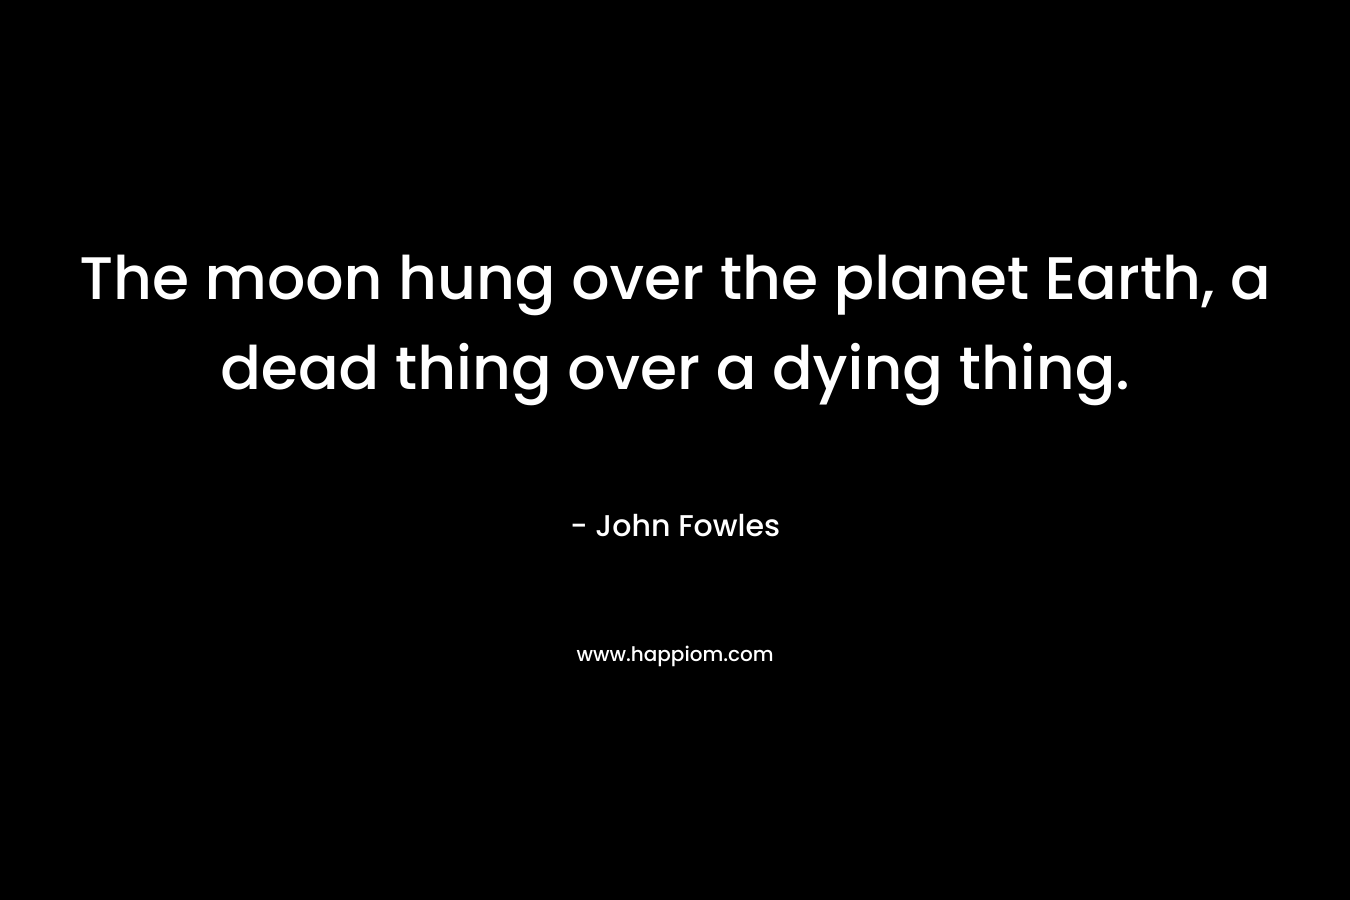 The moon hung over the planet Earth, a dead thing over a dying thing.